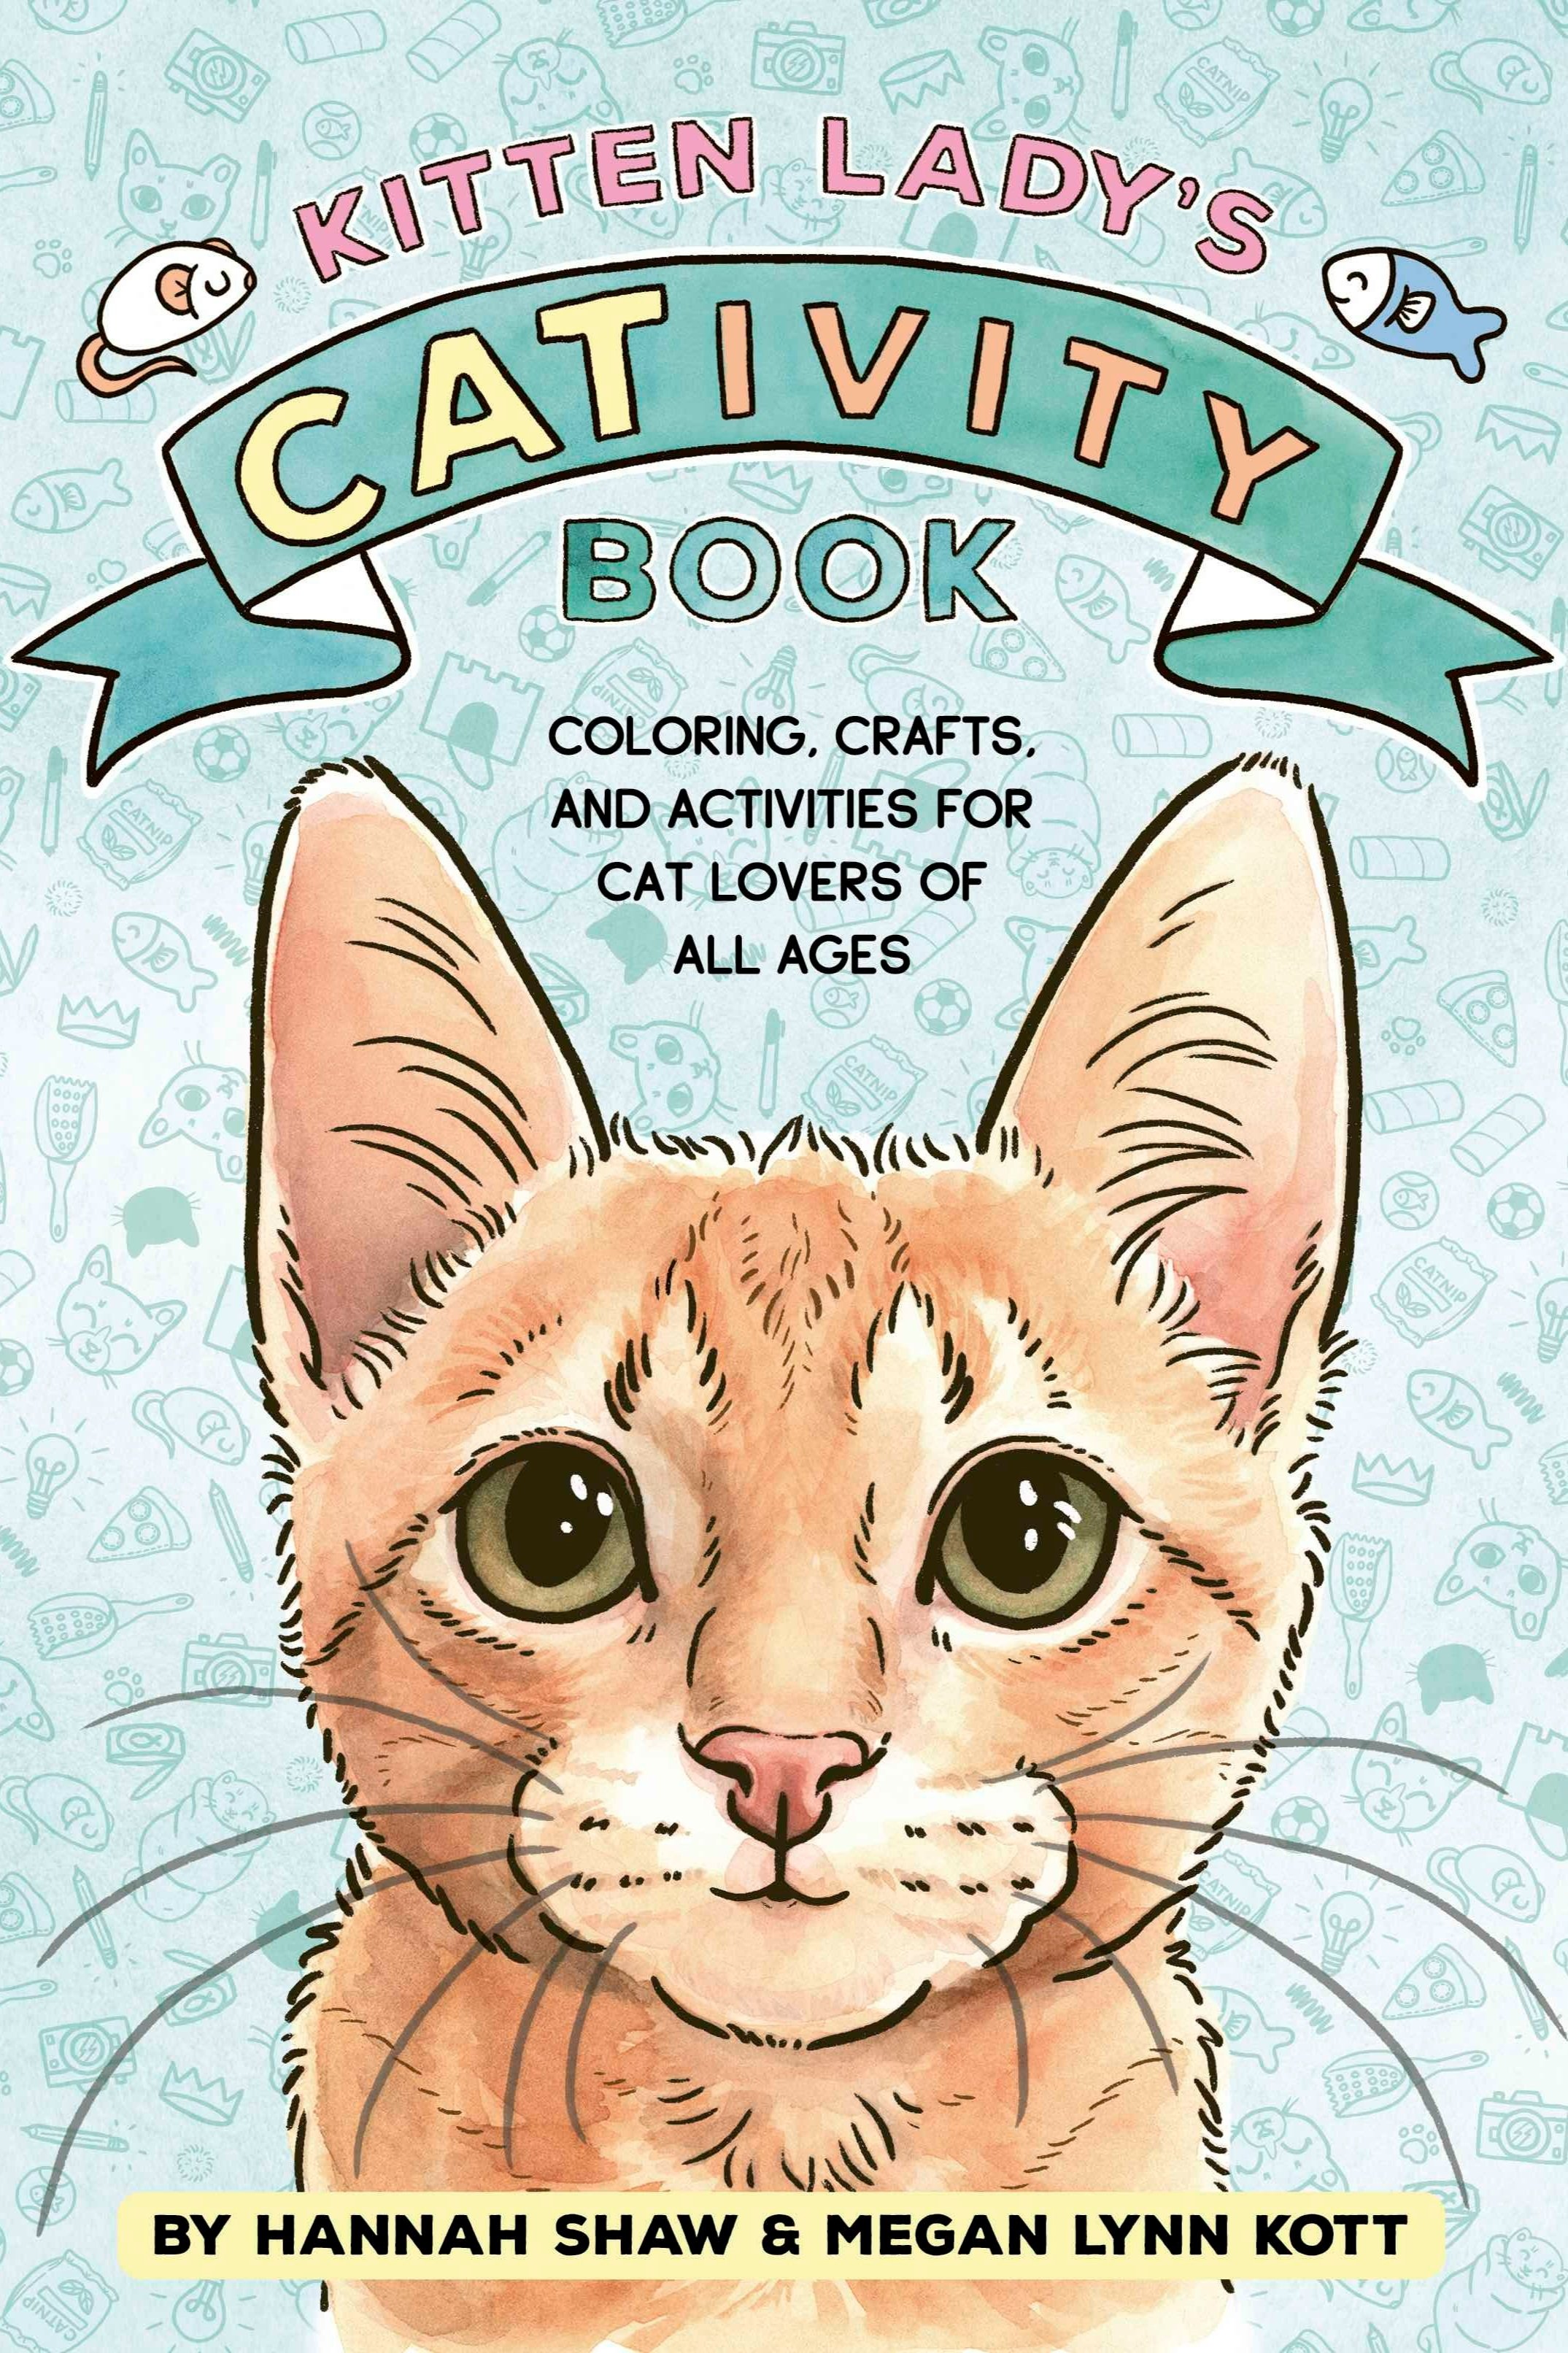 Cat-related puzzles, adorable illustrations, and creative crafts featuring plenty of takeaways to help vulnerable cats.